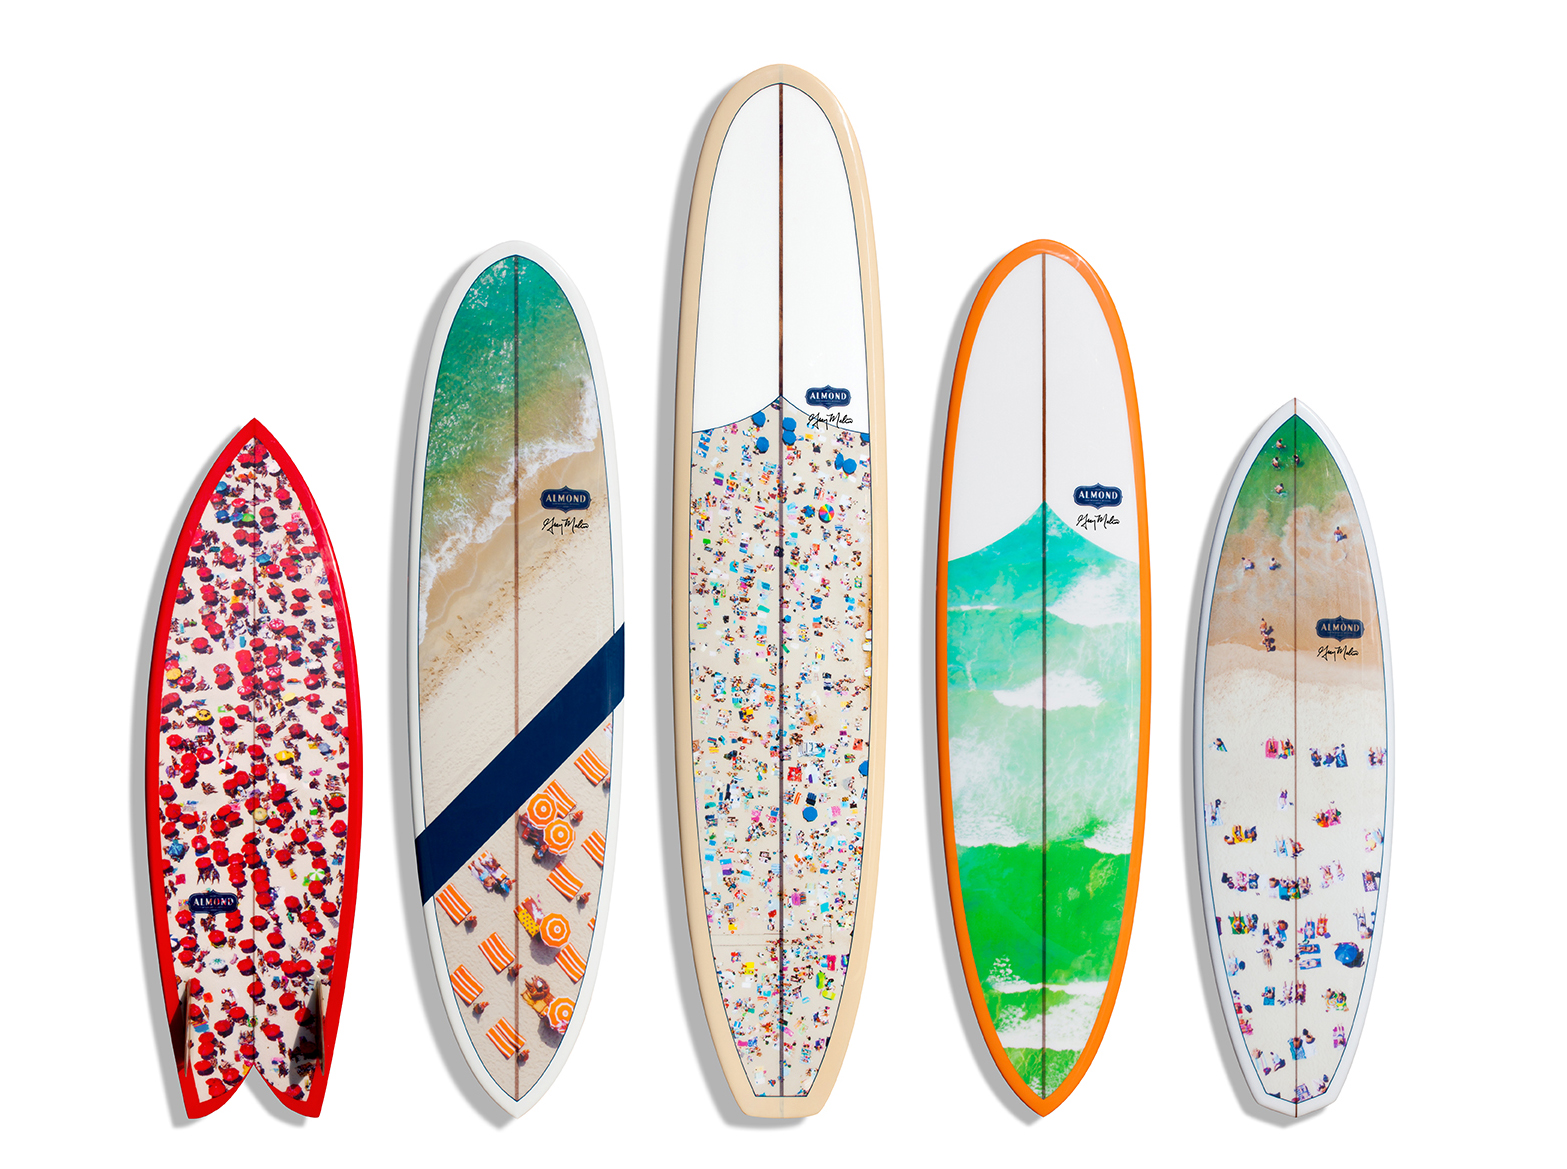  Gray Malin and Almond Surfboards   